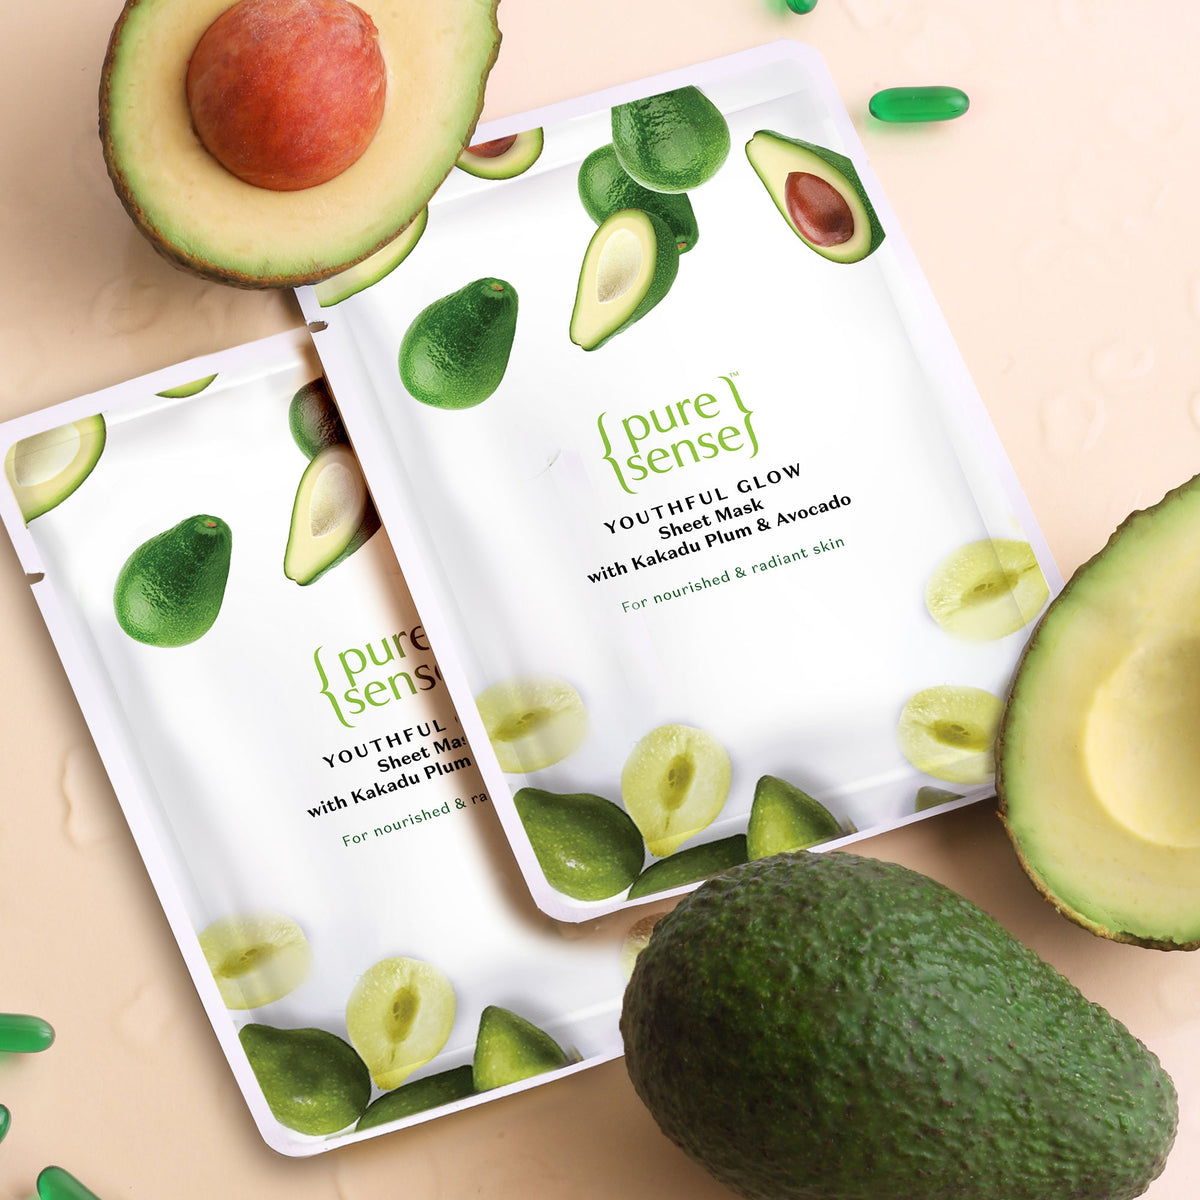 [CRED] Anti-Ageing Sheet Mask with Kakadu Plum & Avocado  (Pack of 2) | From the makers of Parachute Advansed | 30ml